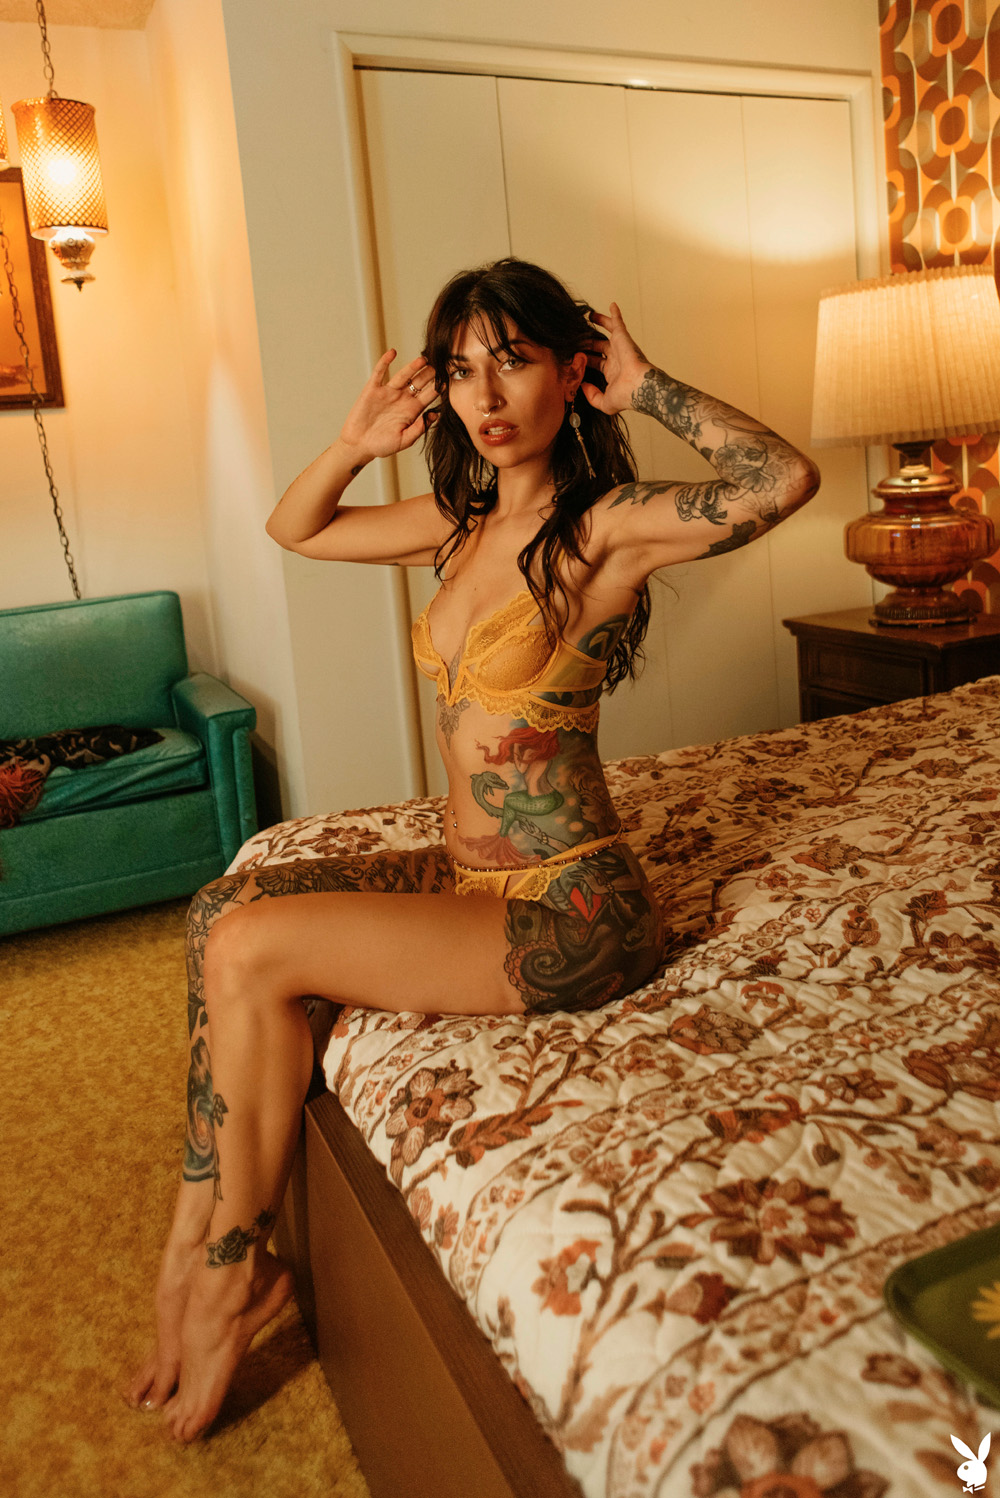 Dallas E Maxwell exposes her inked body in the motel room